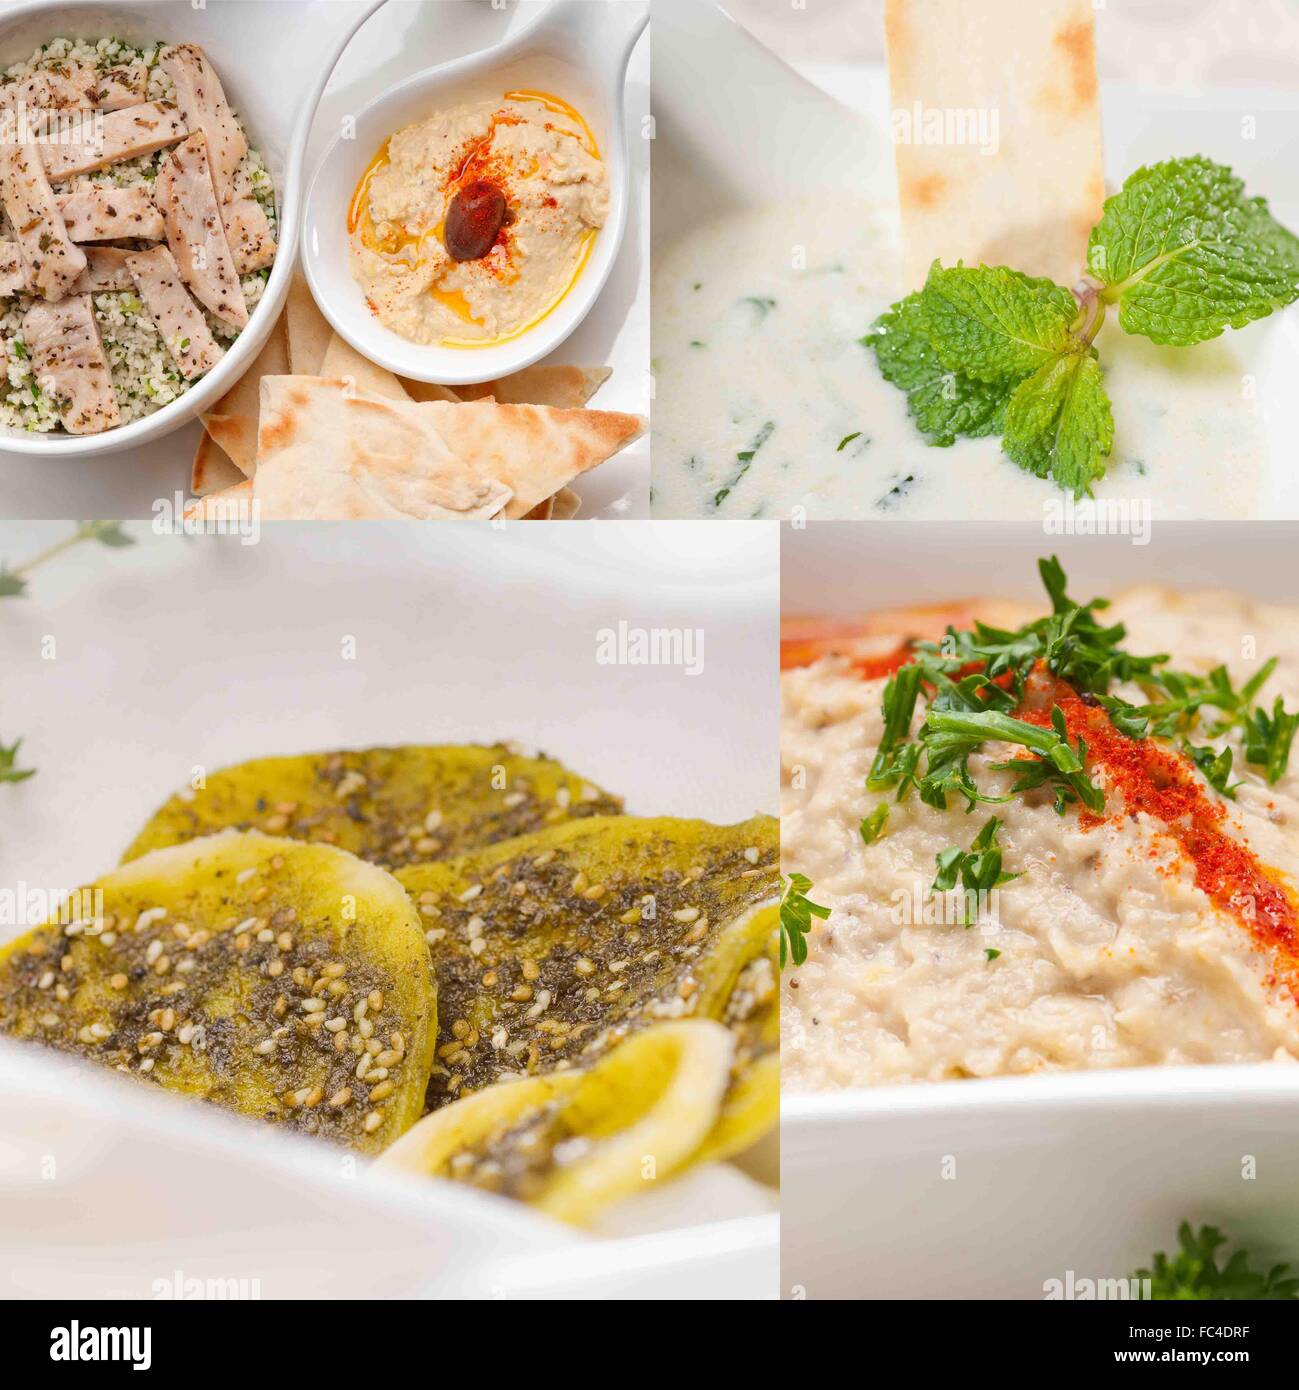 middle east food collage Stock Photo